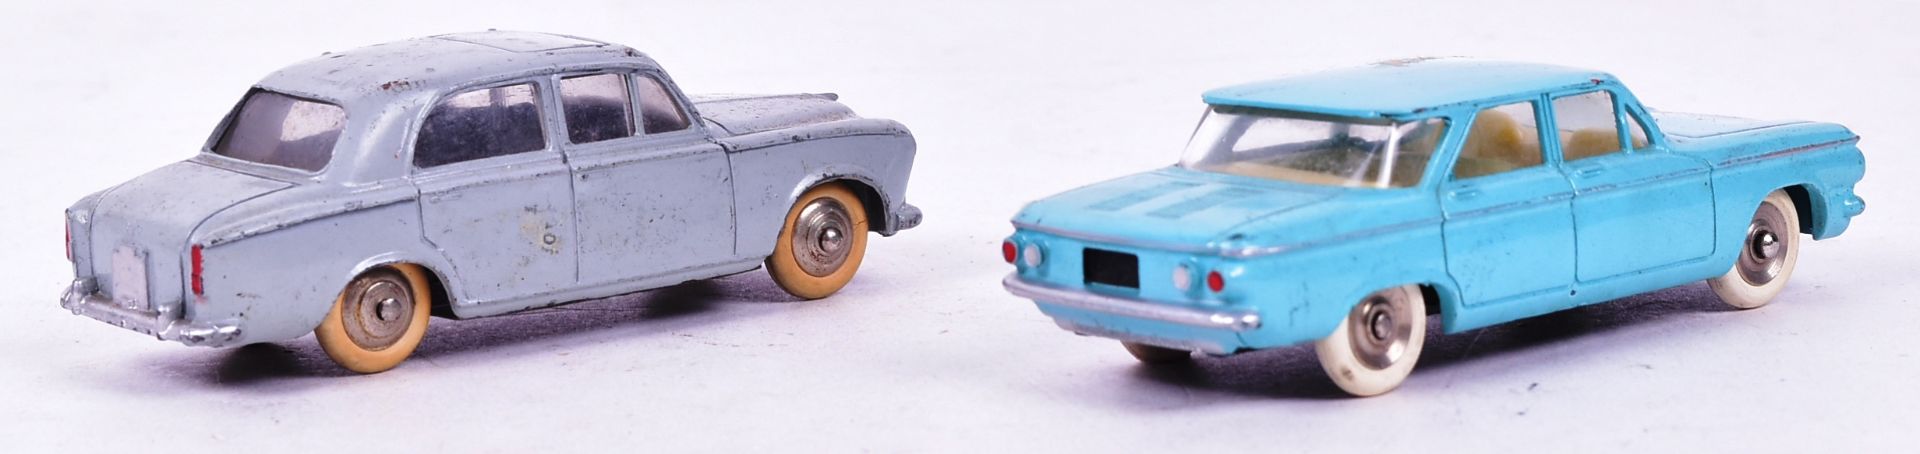 DIECAST - FRENCH DINKY TOYS - PEUGEOT 403 & CHEVROLET CORVAIR - Image 2 of 6